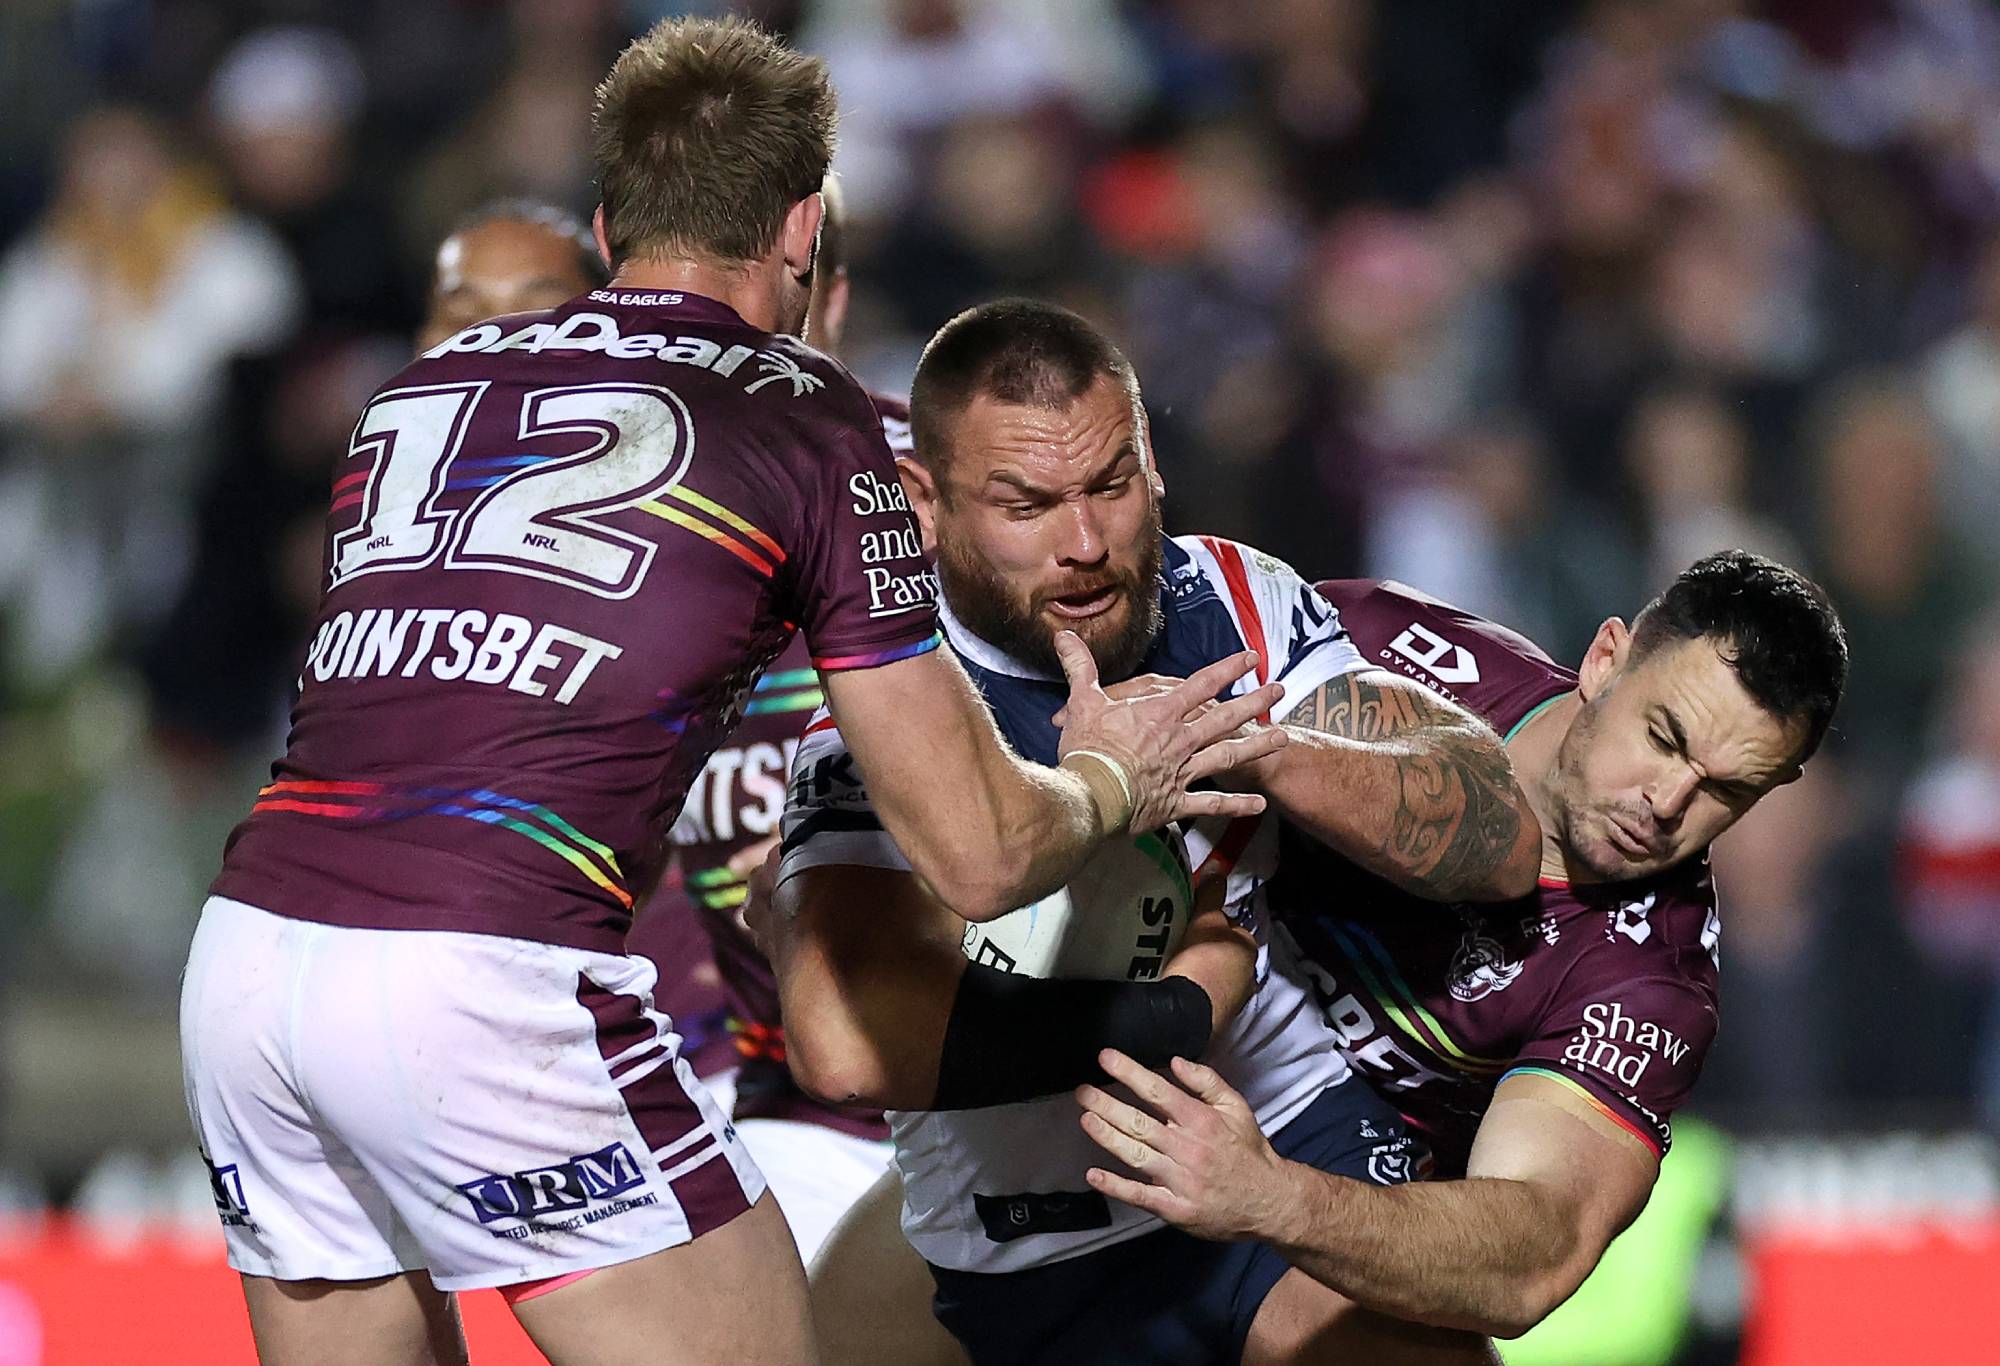 SYDNEY, AUSTRALIA - JULY 28: Jared Waerea-Hargreaves of the Roosters is tackled during the round 20 NRL match between the Manly Sea Eagles and the Sydney Roosters at 4 Pines Park on July 28, 2022, in Sydney, Australia. (Photo by Cameron Spencer/Getty Images)